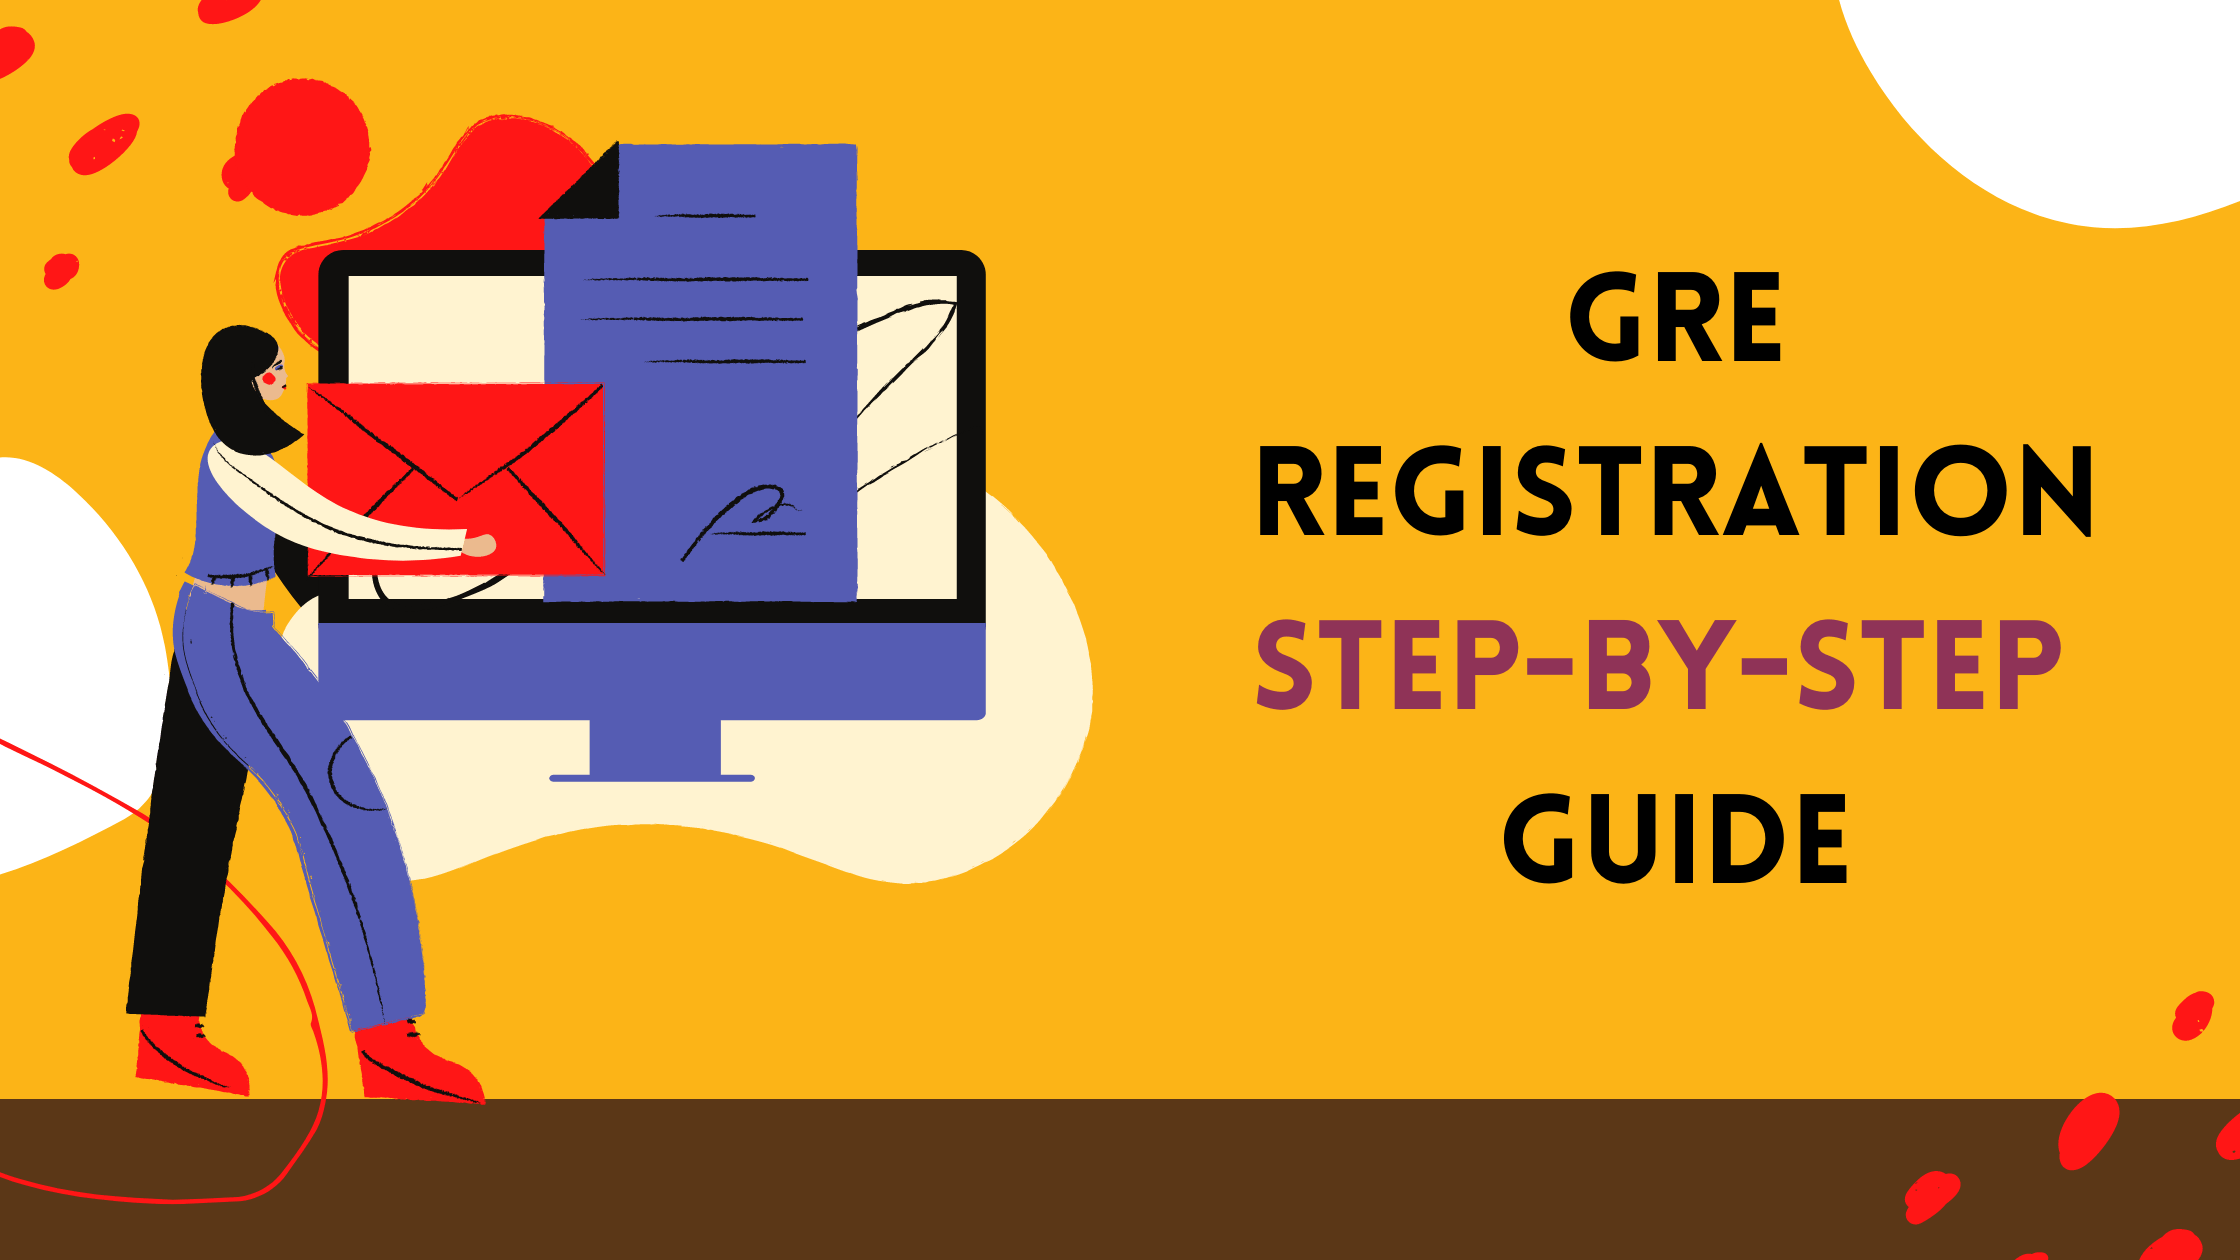 How to do the GRE Registration?